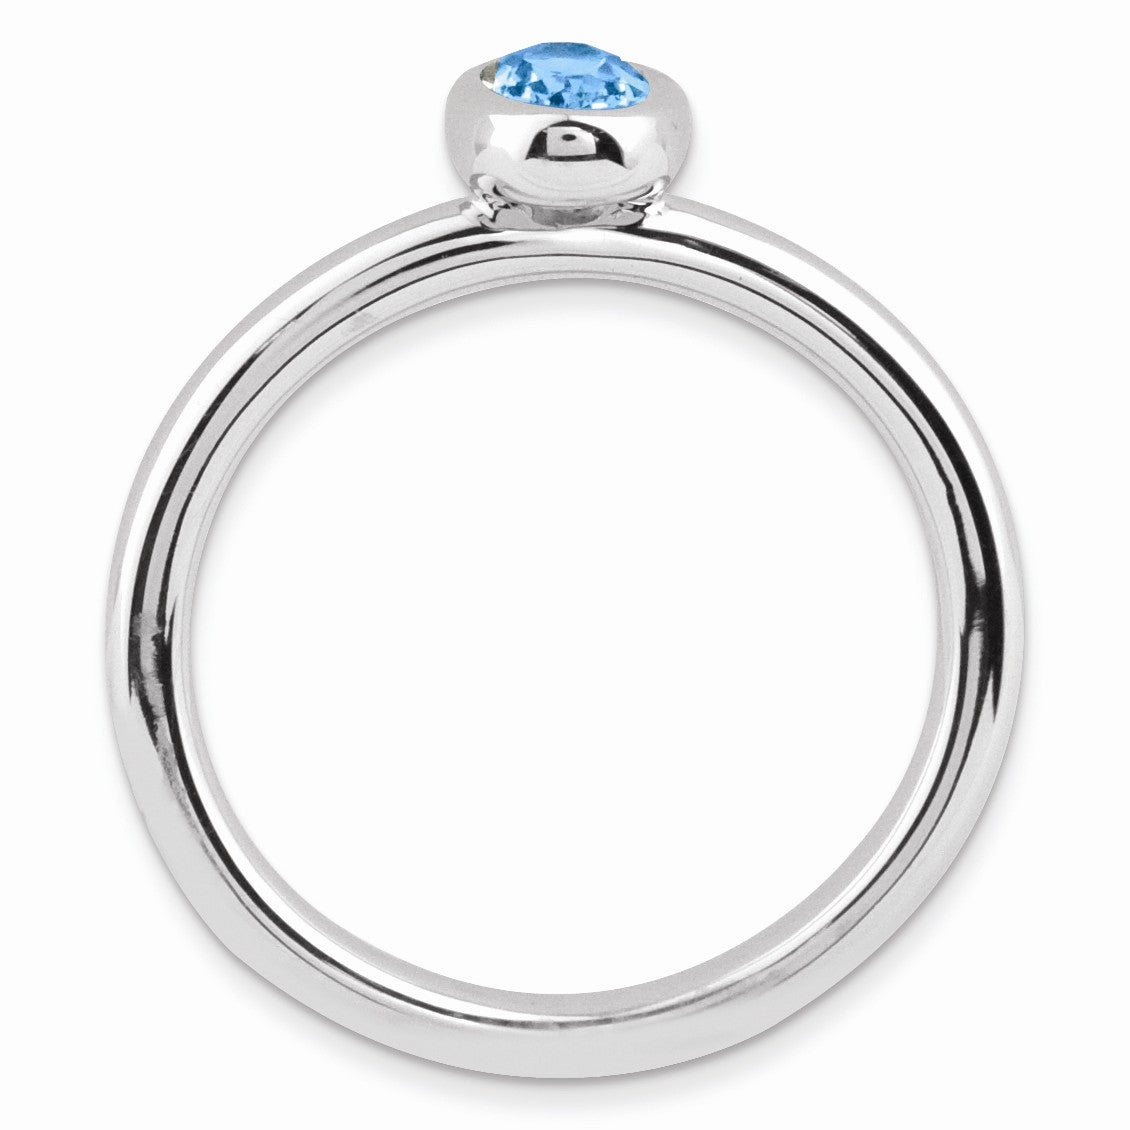 Alternate view of the Sterling Silver Stackable Oval Blue Topaz Solitaire Ring by The Black Bow Jewelry Co.